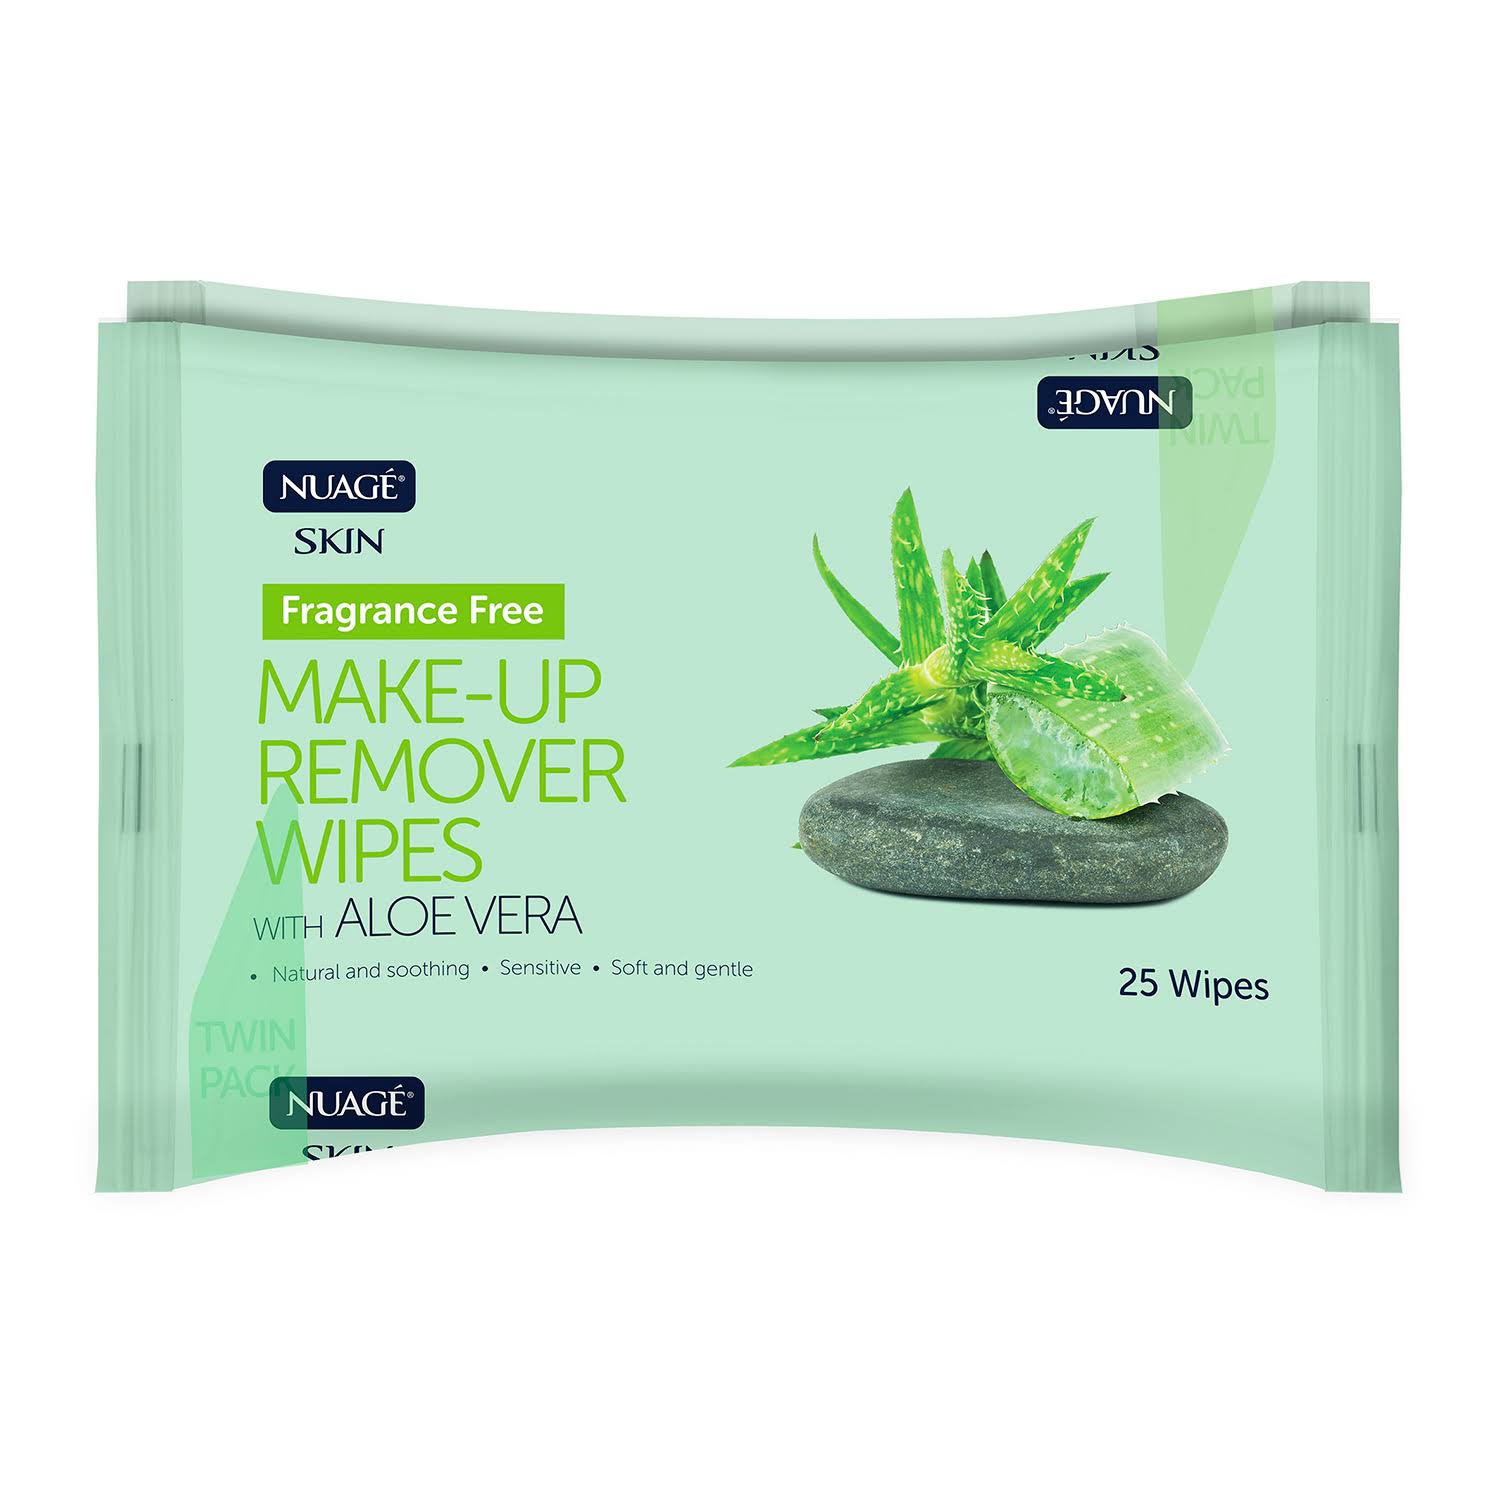 Nuage Skin Fragrance Free Make-Up Remover Wipes with Aloe Vera Twin Pack